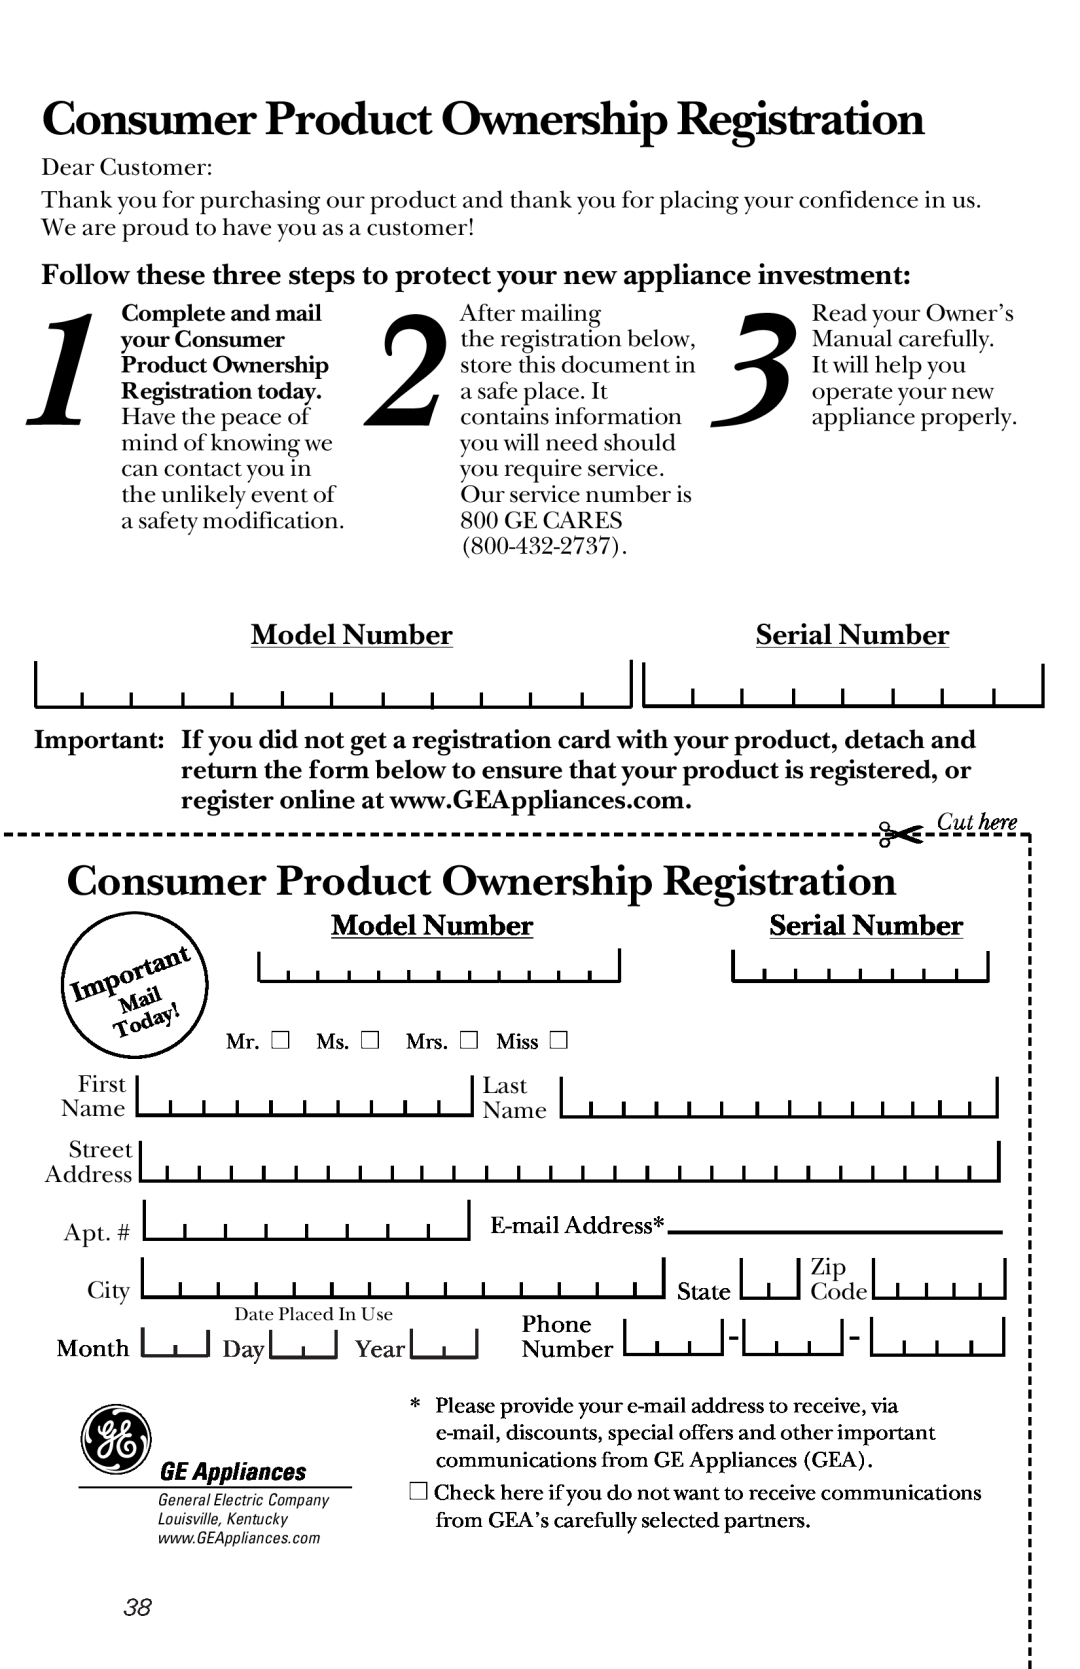 GE JES1334 Consumer Product Ownership Registration, Follow these three steps to protect your new appliance investment 